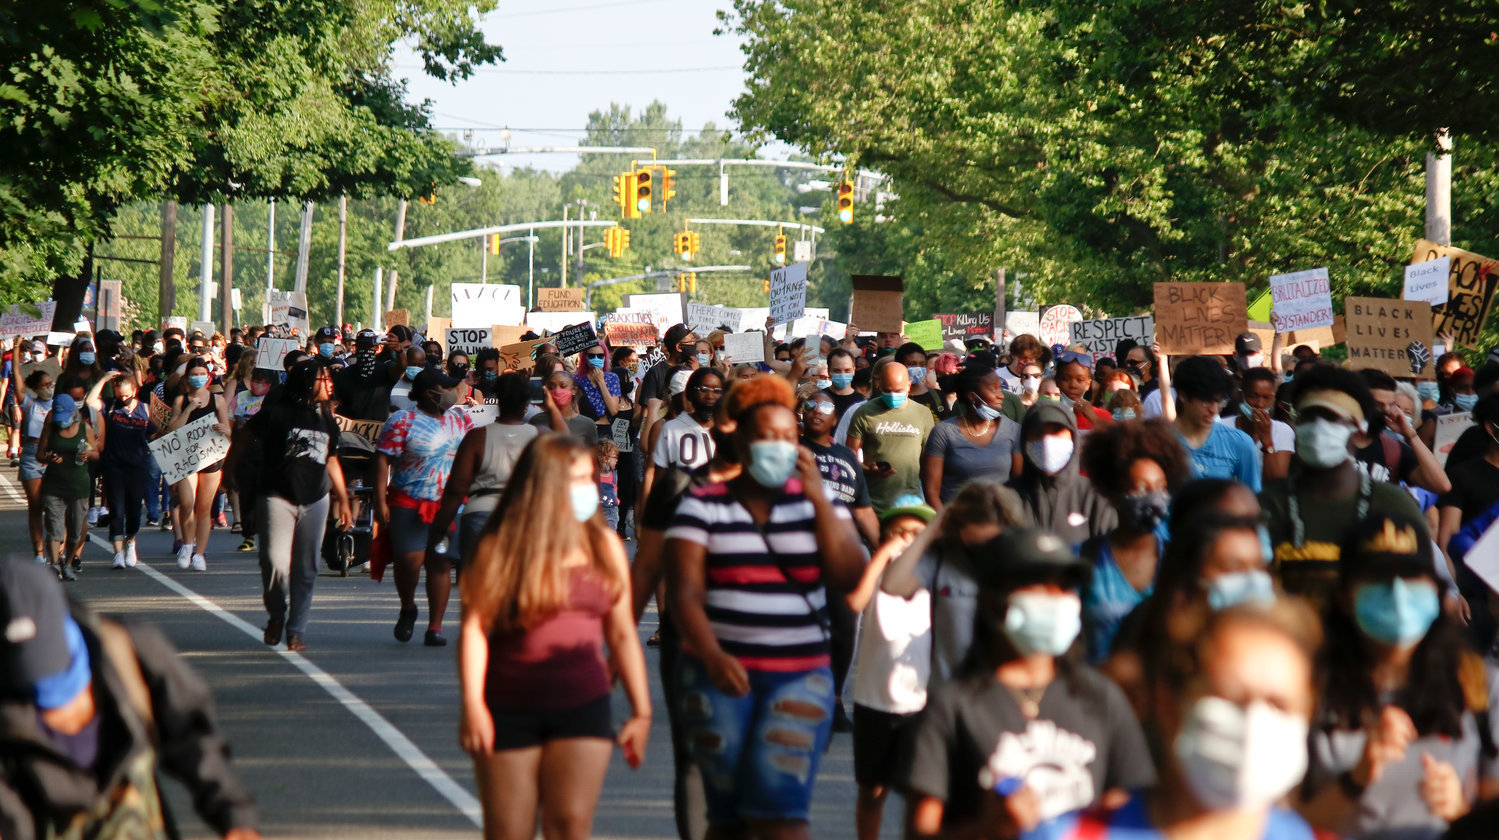 Malverne and Lakeview residents joined nationwide protests in the summer of 2020 following the police killing of George Floyd in Minneapolis, and soon began calling for changing the name of Lindner Place.